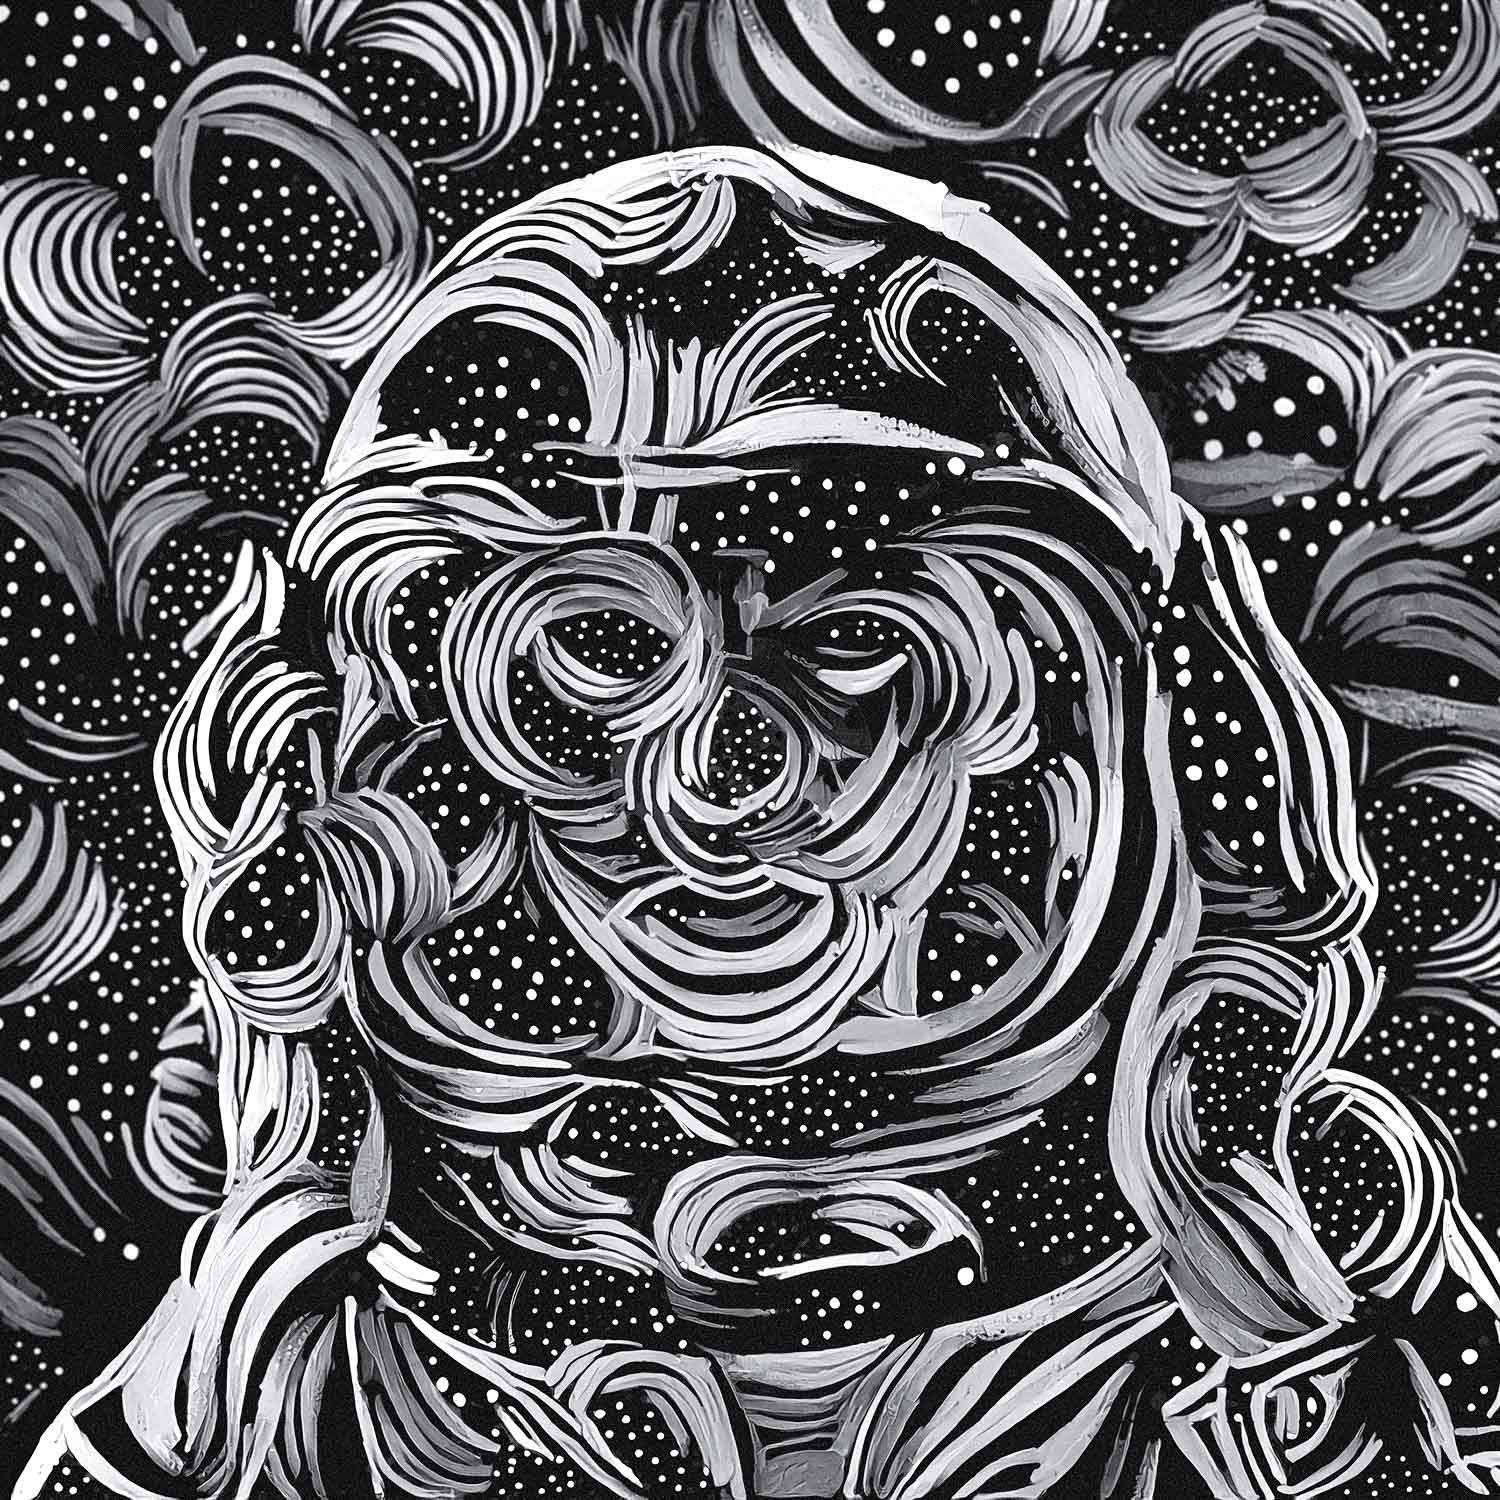 A black and white illustration of a person with their hands over their ears with a star galaxy as the backdrop.